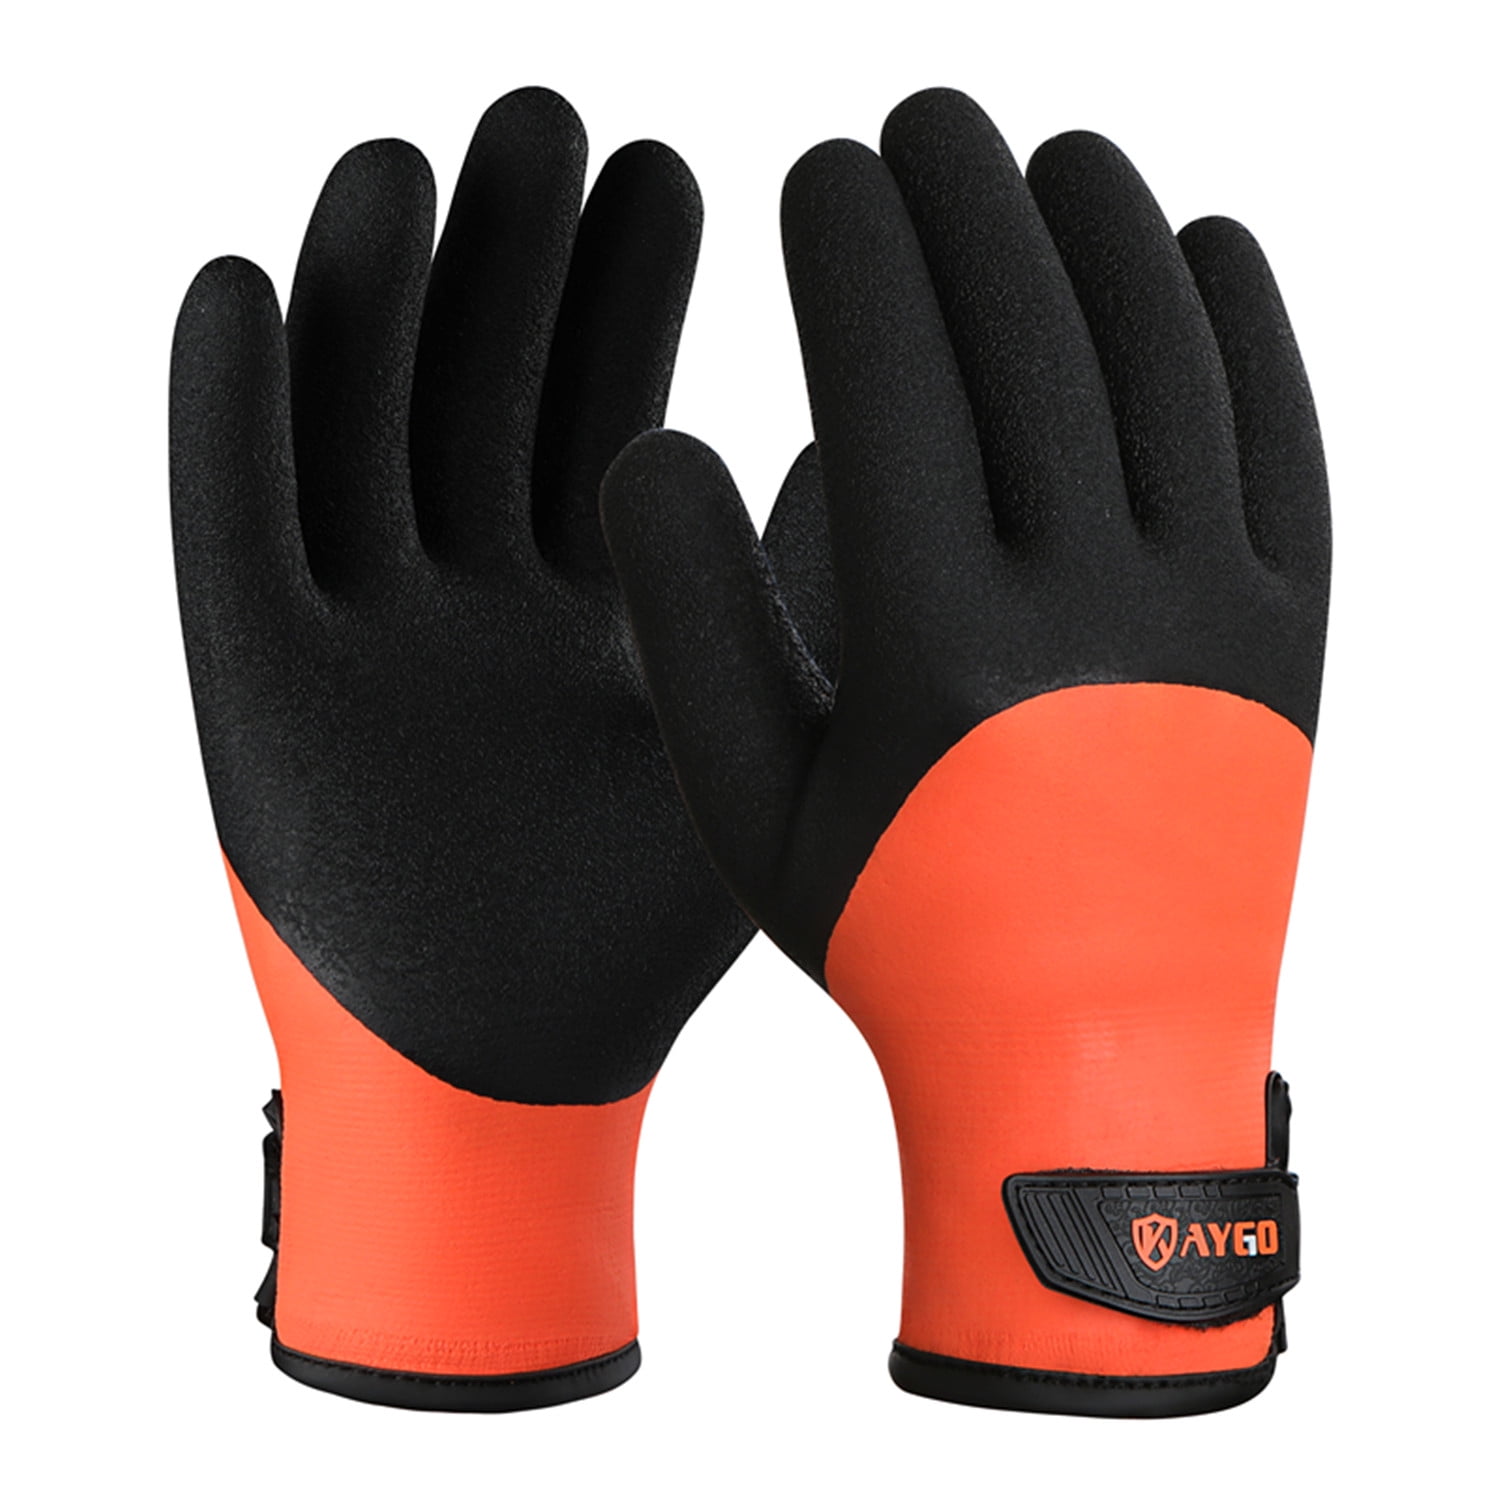 Freebies are shared everyday KAYGO Work Gloves in Personal Protective  Equipment , aygo work gloves 